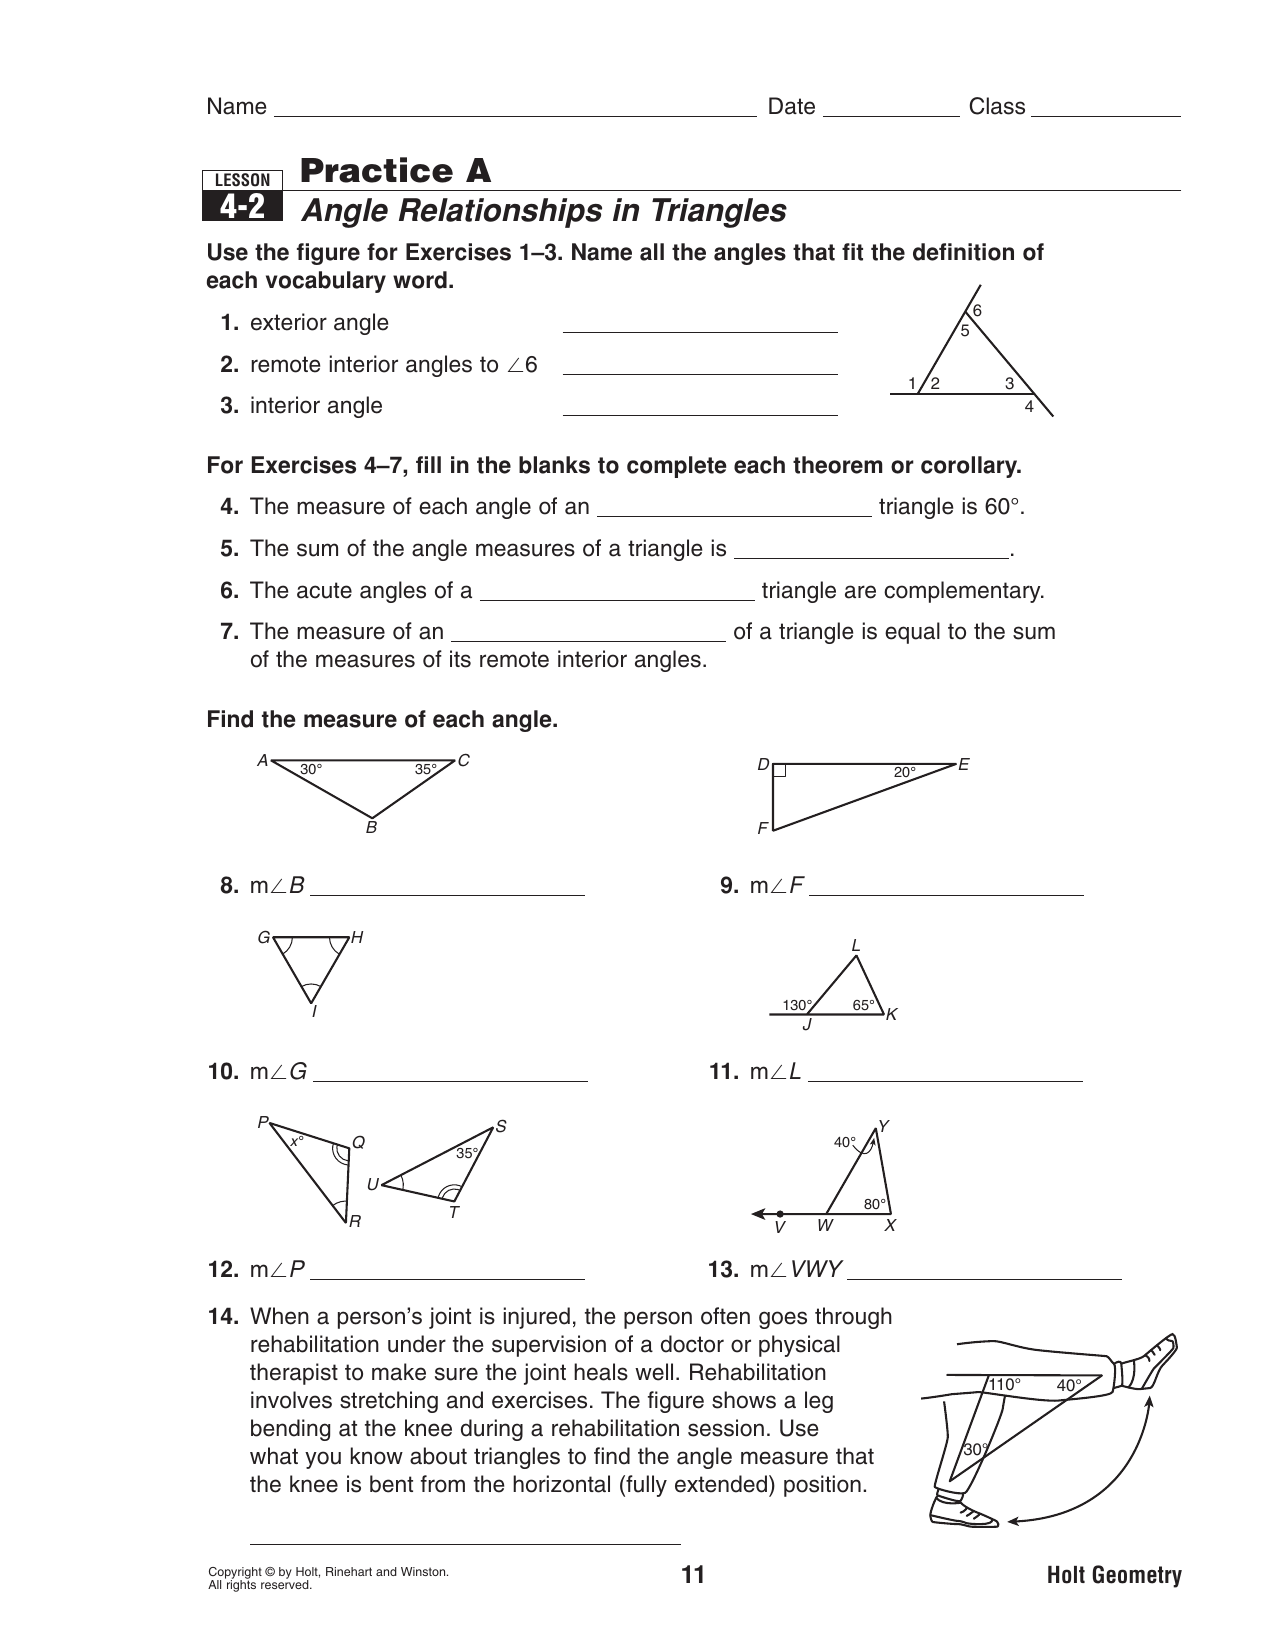 4 2 Practice A Angle Relationships In Triangles